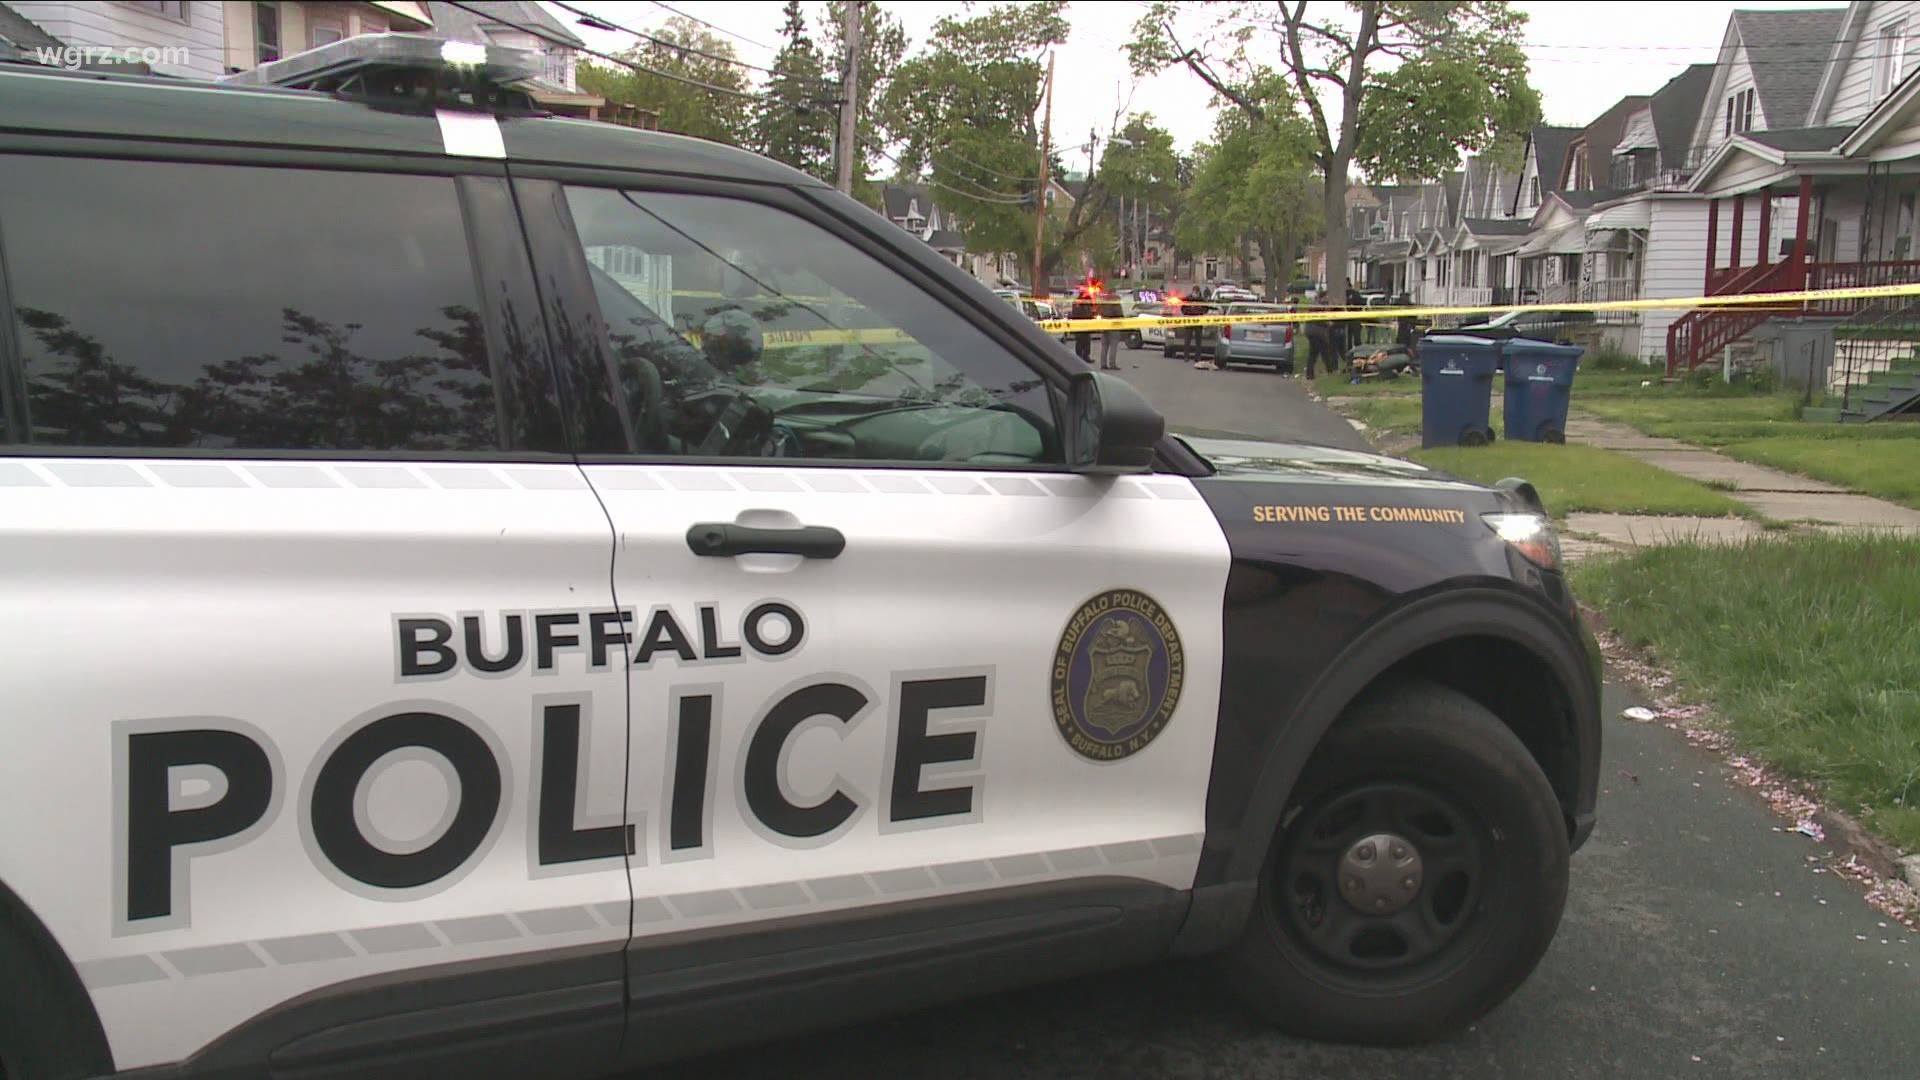 Buffalo police say two men were shot, one died at the scene and one is listed in critical condition at ECMC.